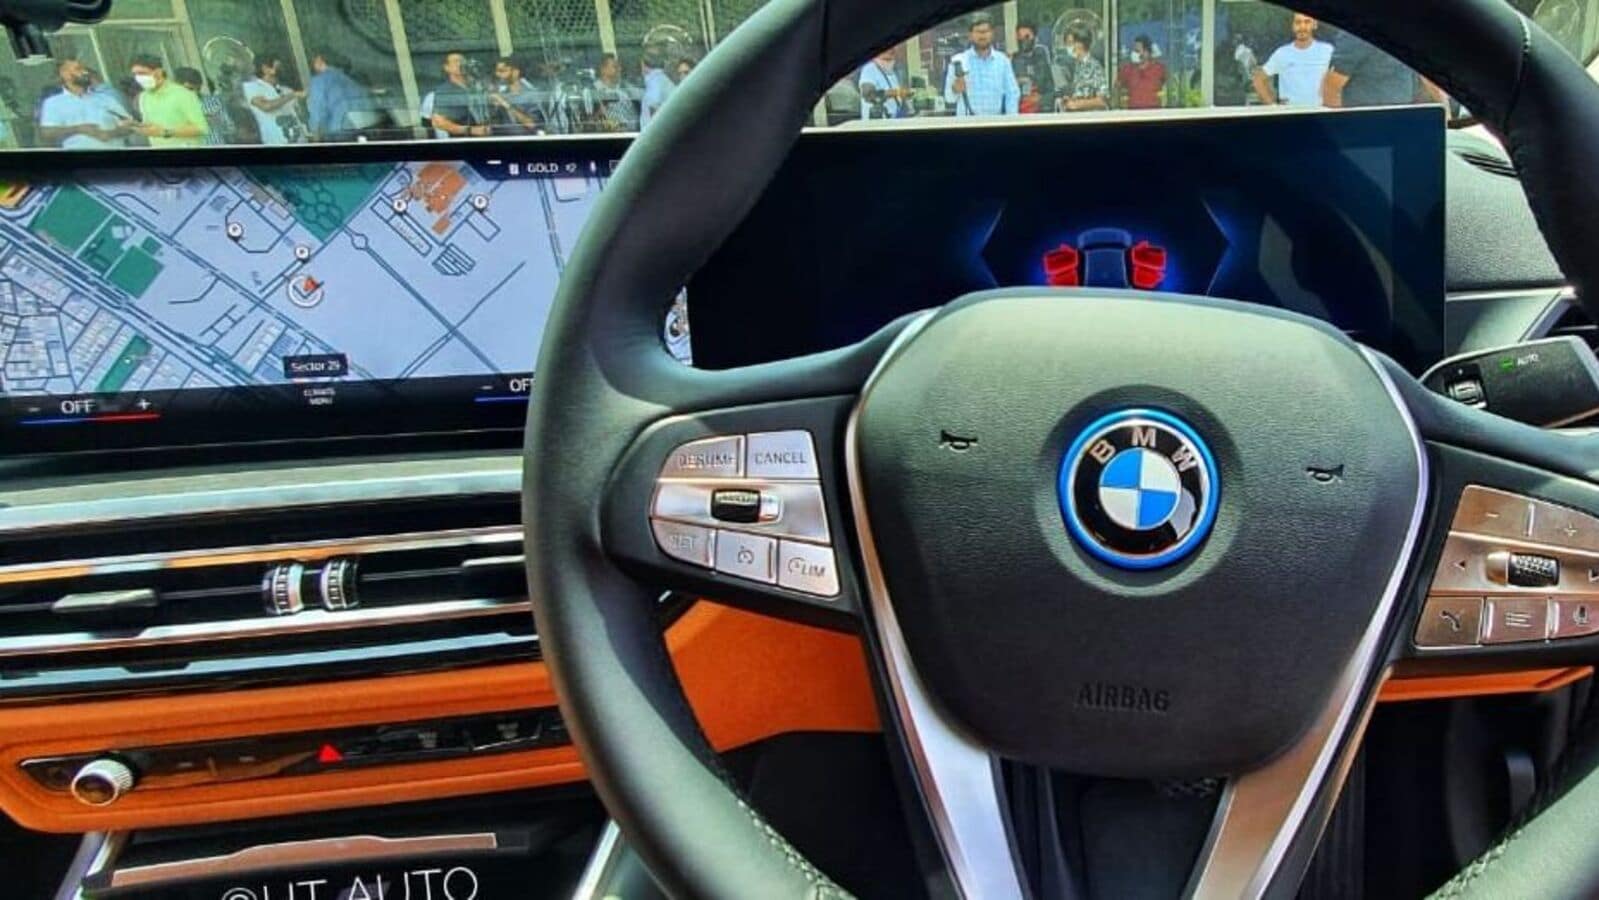 BMW heated seat subscription may end up in a hacking spree: Details here